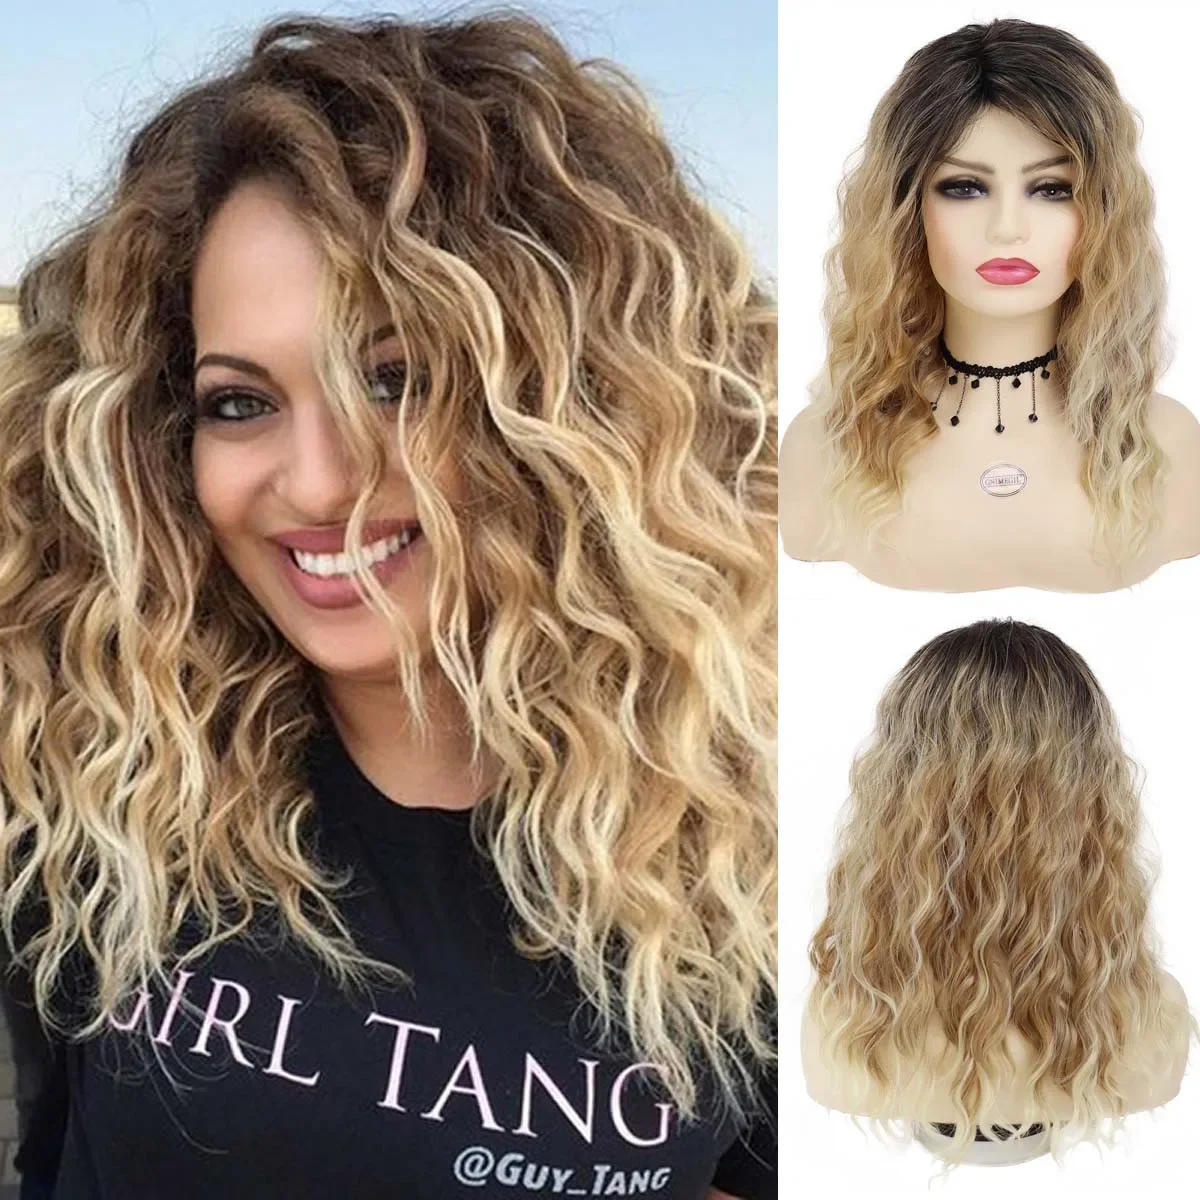 

GNIMEGIL Synthetic Curly Wigs for Women Long Curly Wave Wig Blonde Dark Root Ombre Wig Natural Fluffy Daily Cosplay Ladies Wig